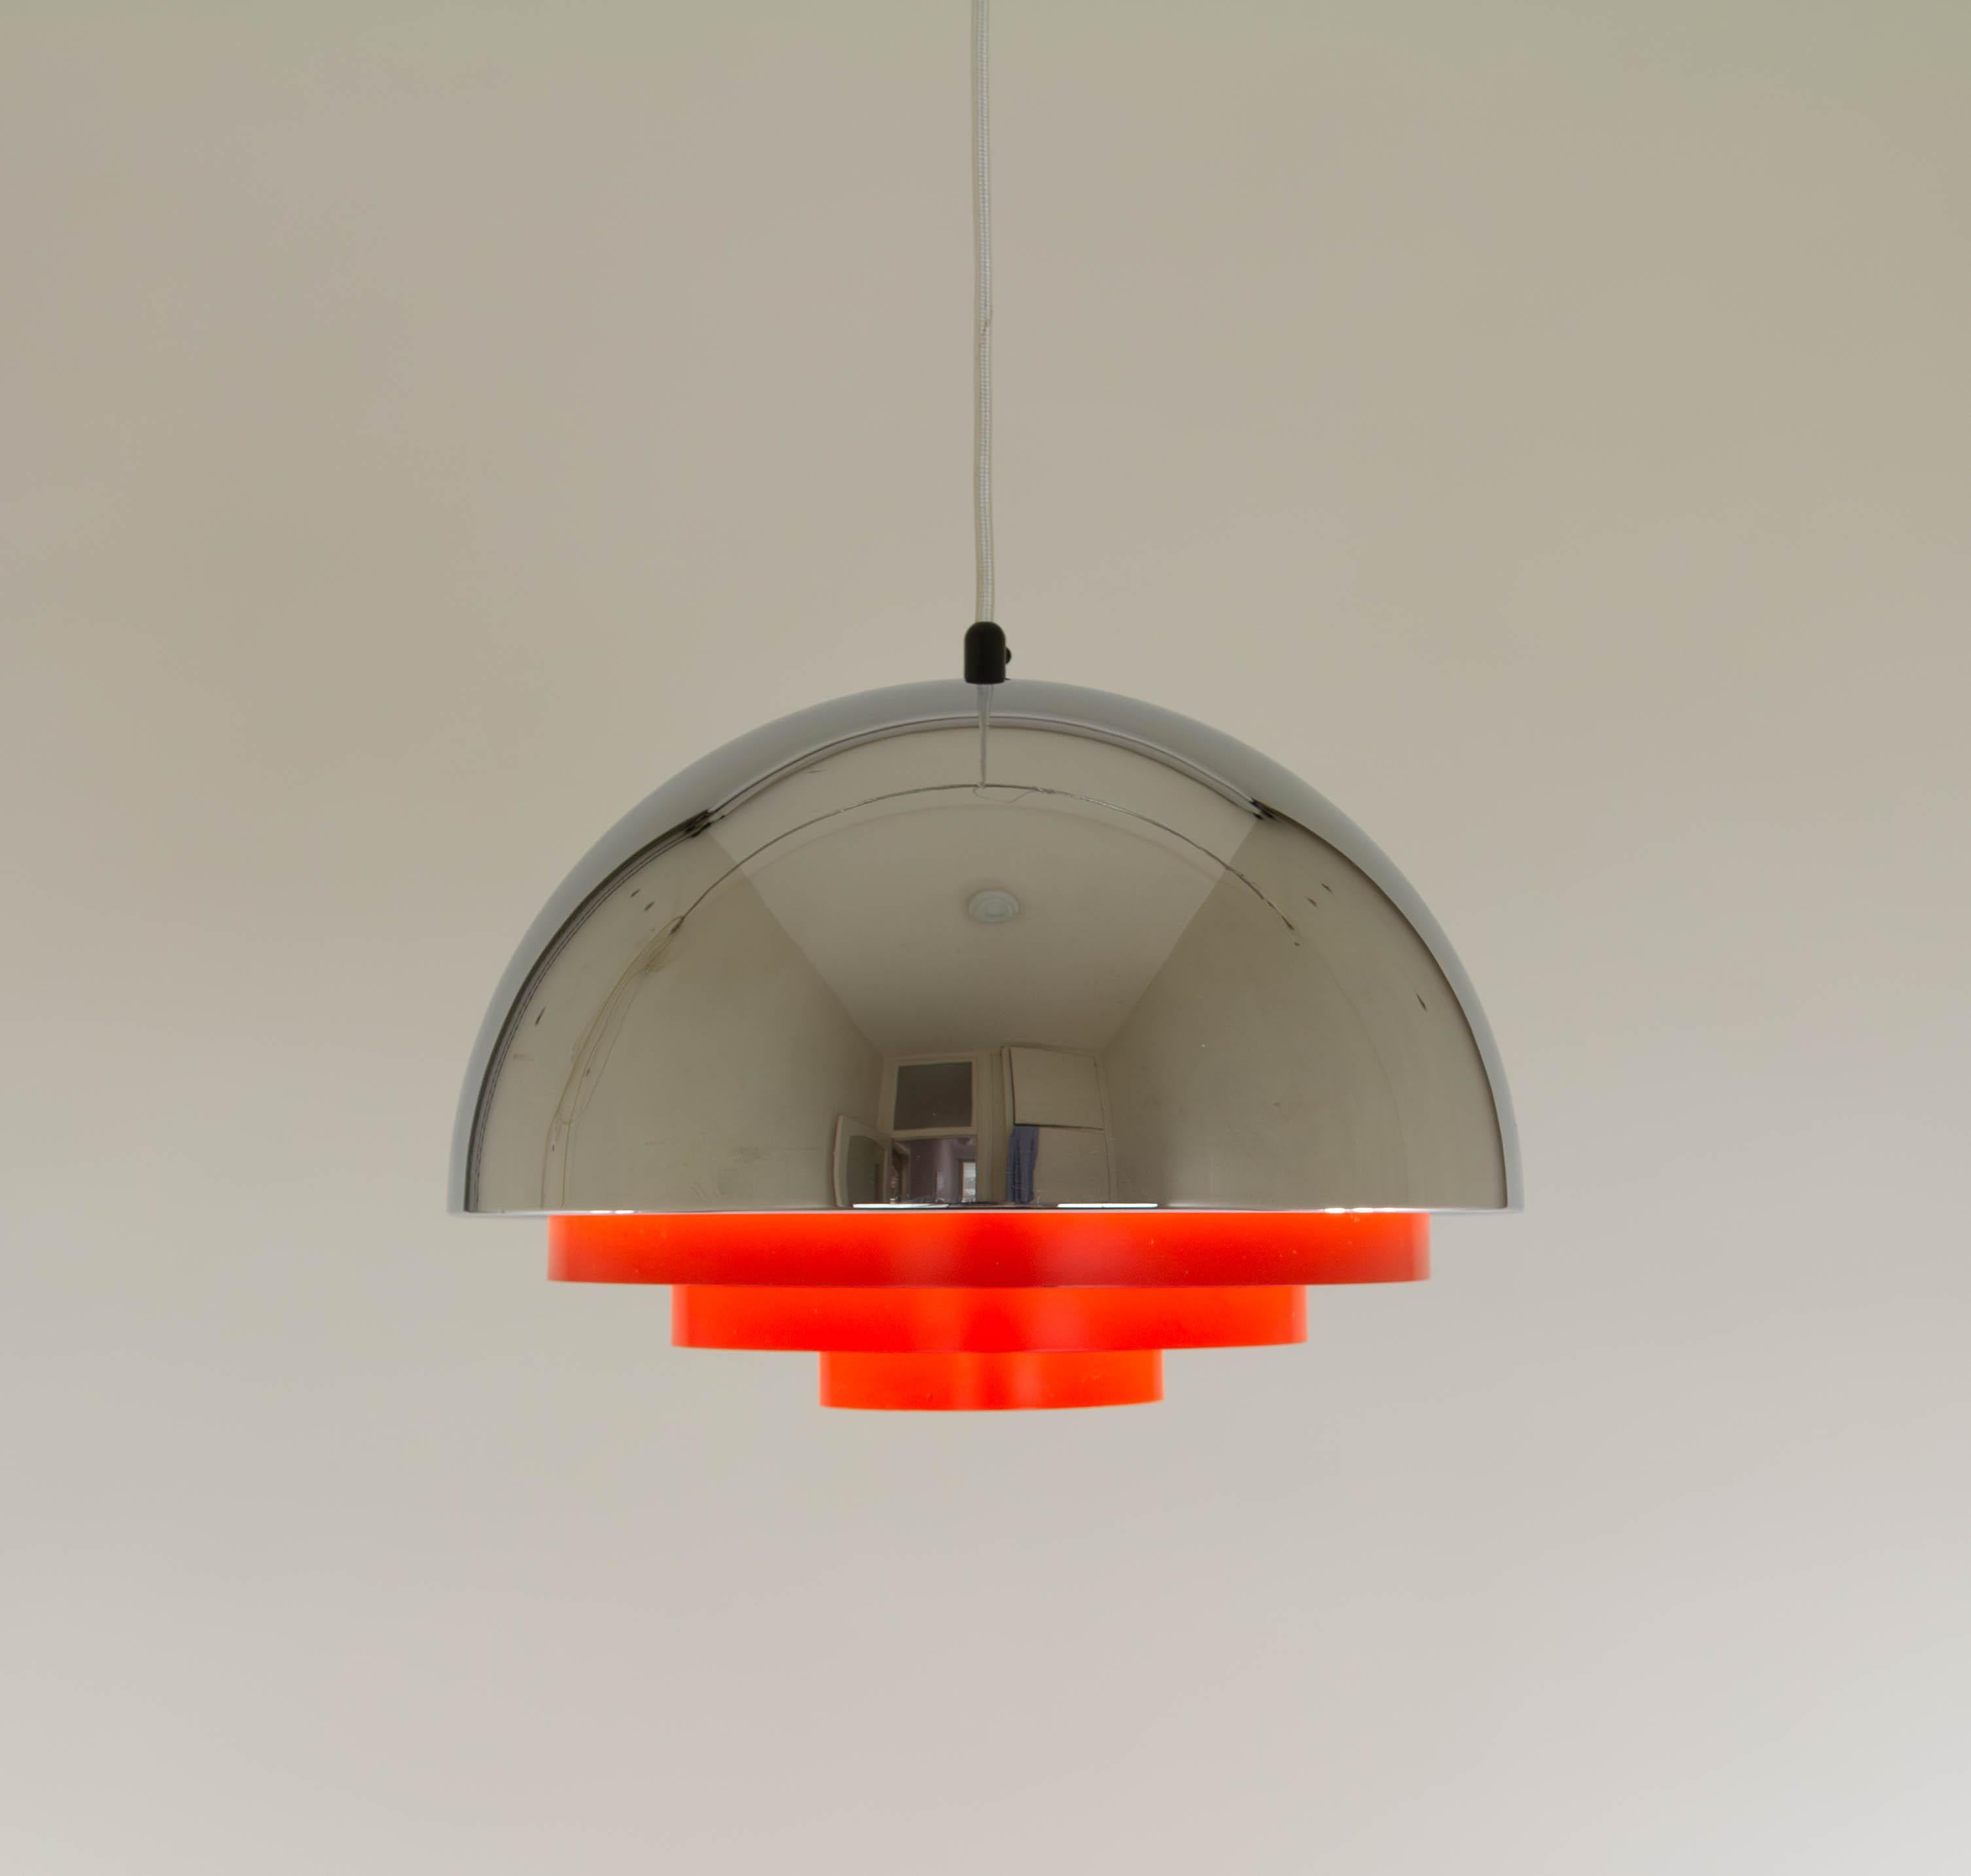 Milieu pendant designed by Jo Hammerborg that ­–like many of his designs– has a sculptural quality.

Fog & Mørup issued this special edition of Milieu in the 1970s as part of their Chrome Line. The strong presence of chrome in combination with